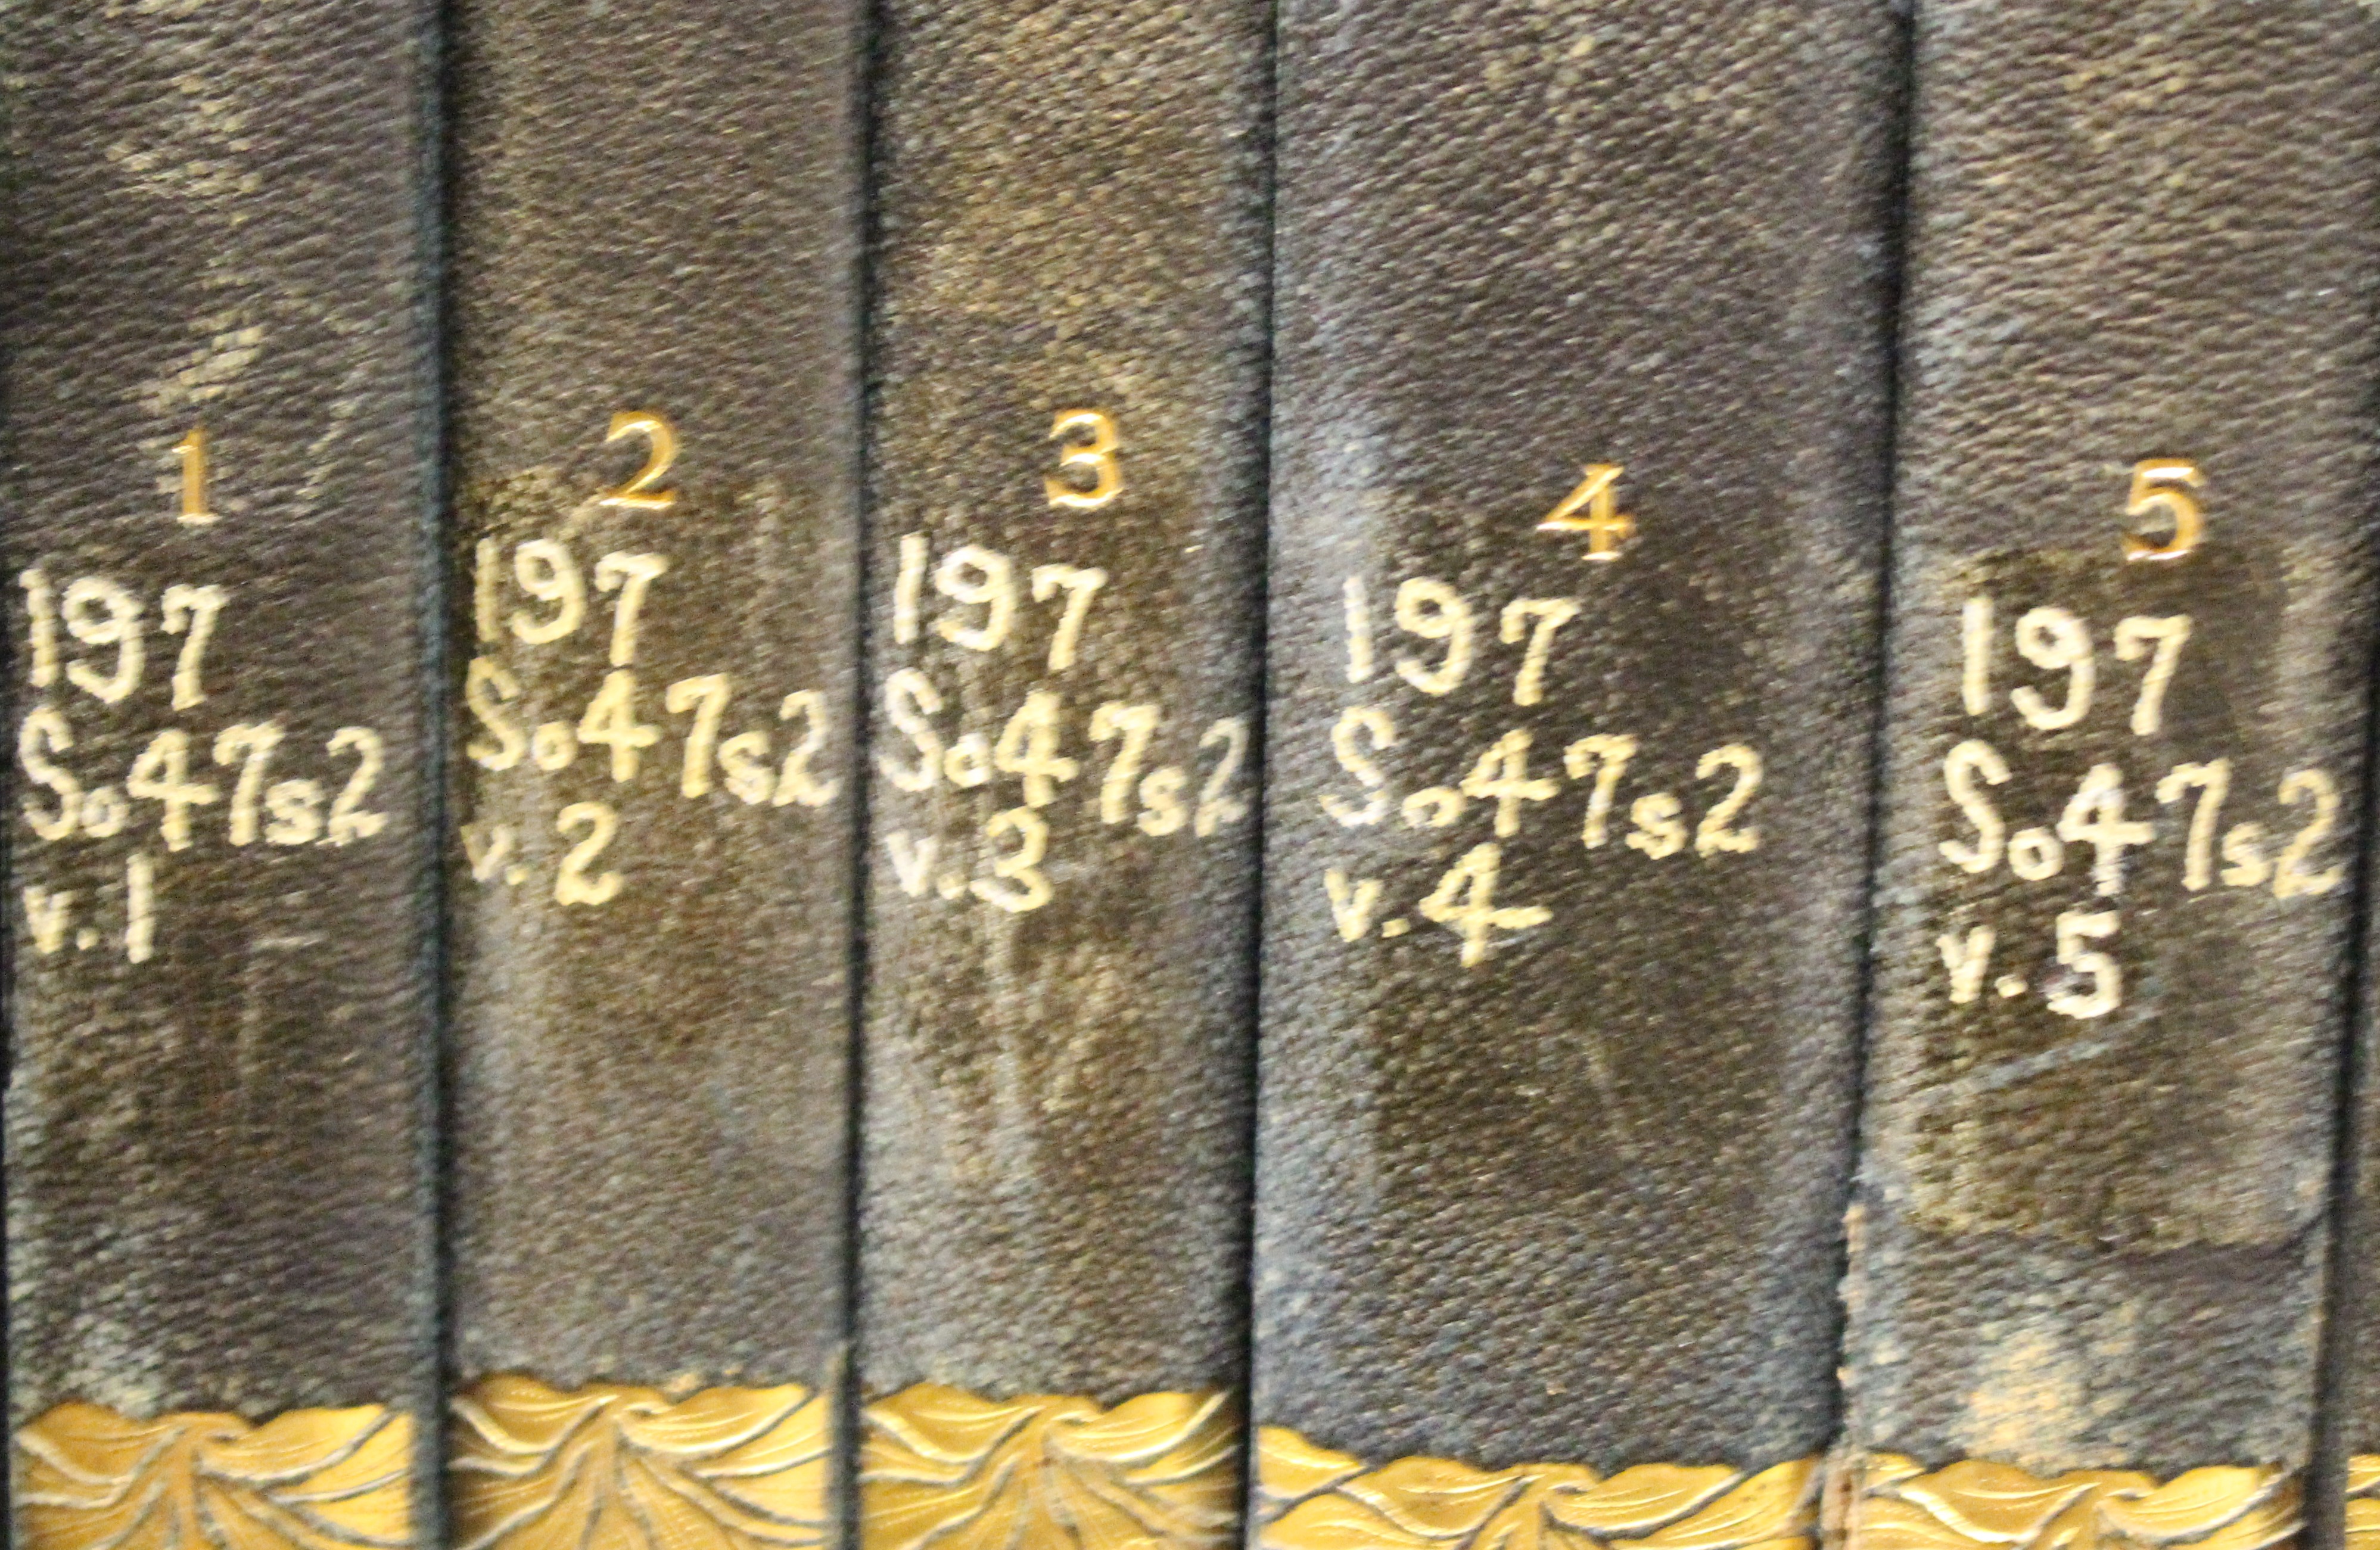 Books with Dewey Decimal call numbers